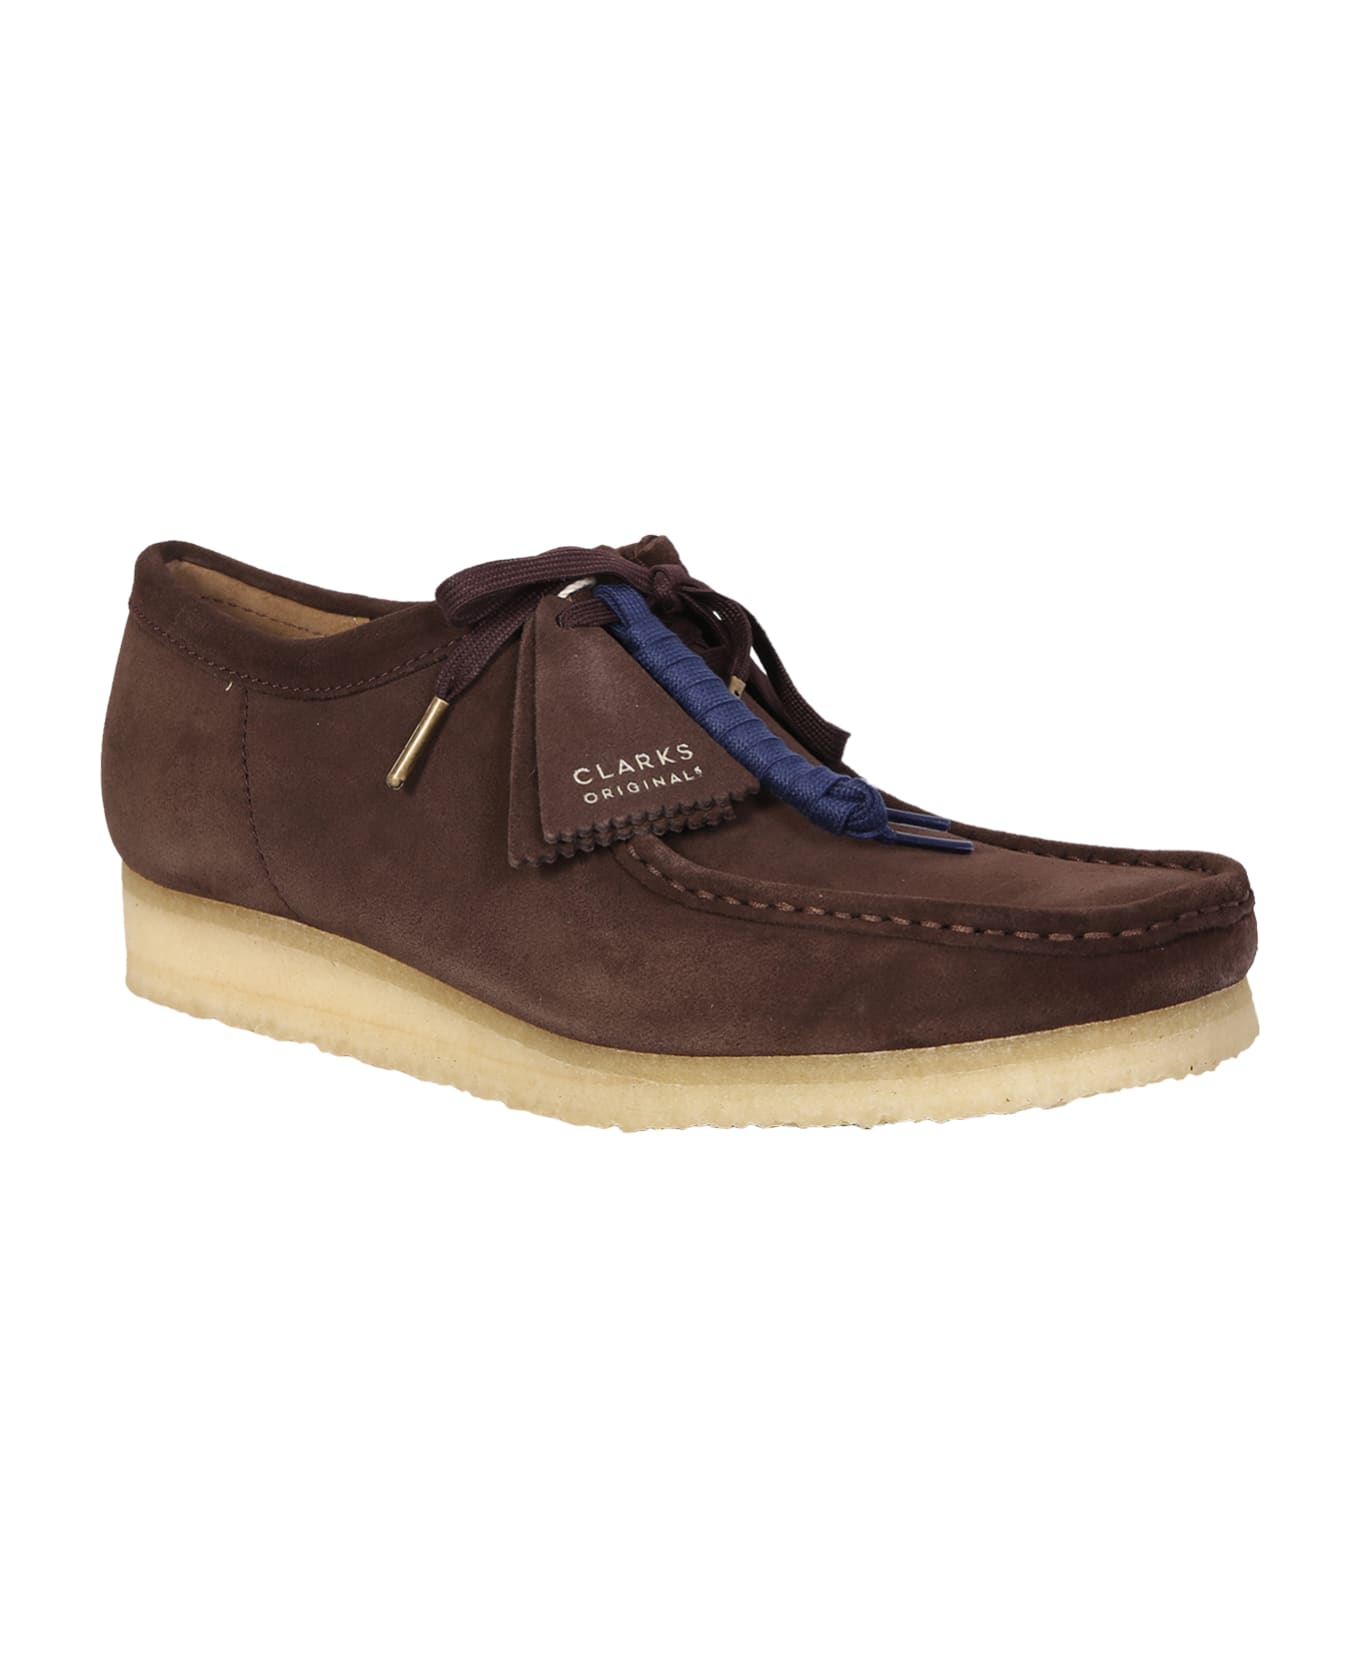 Clarks Wallabee Shoes - Brown